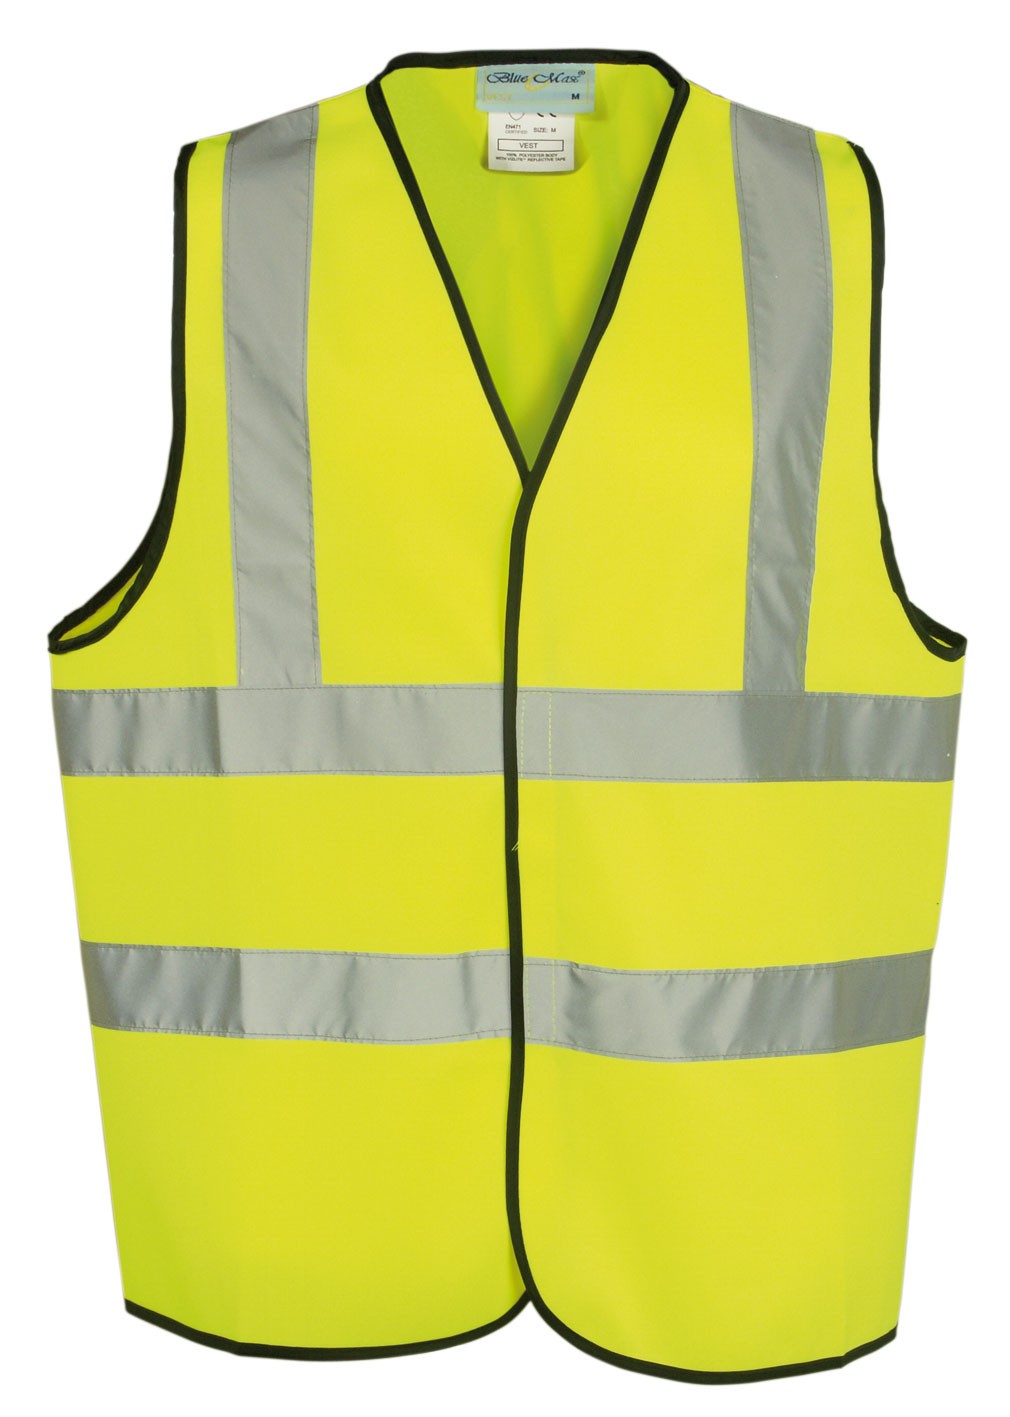 The Yellow Vests Get it Right – The Burning Platform